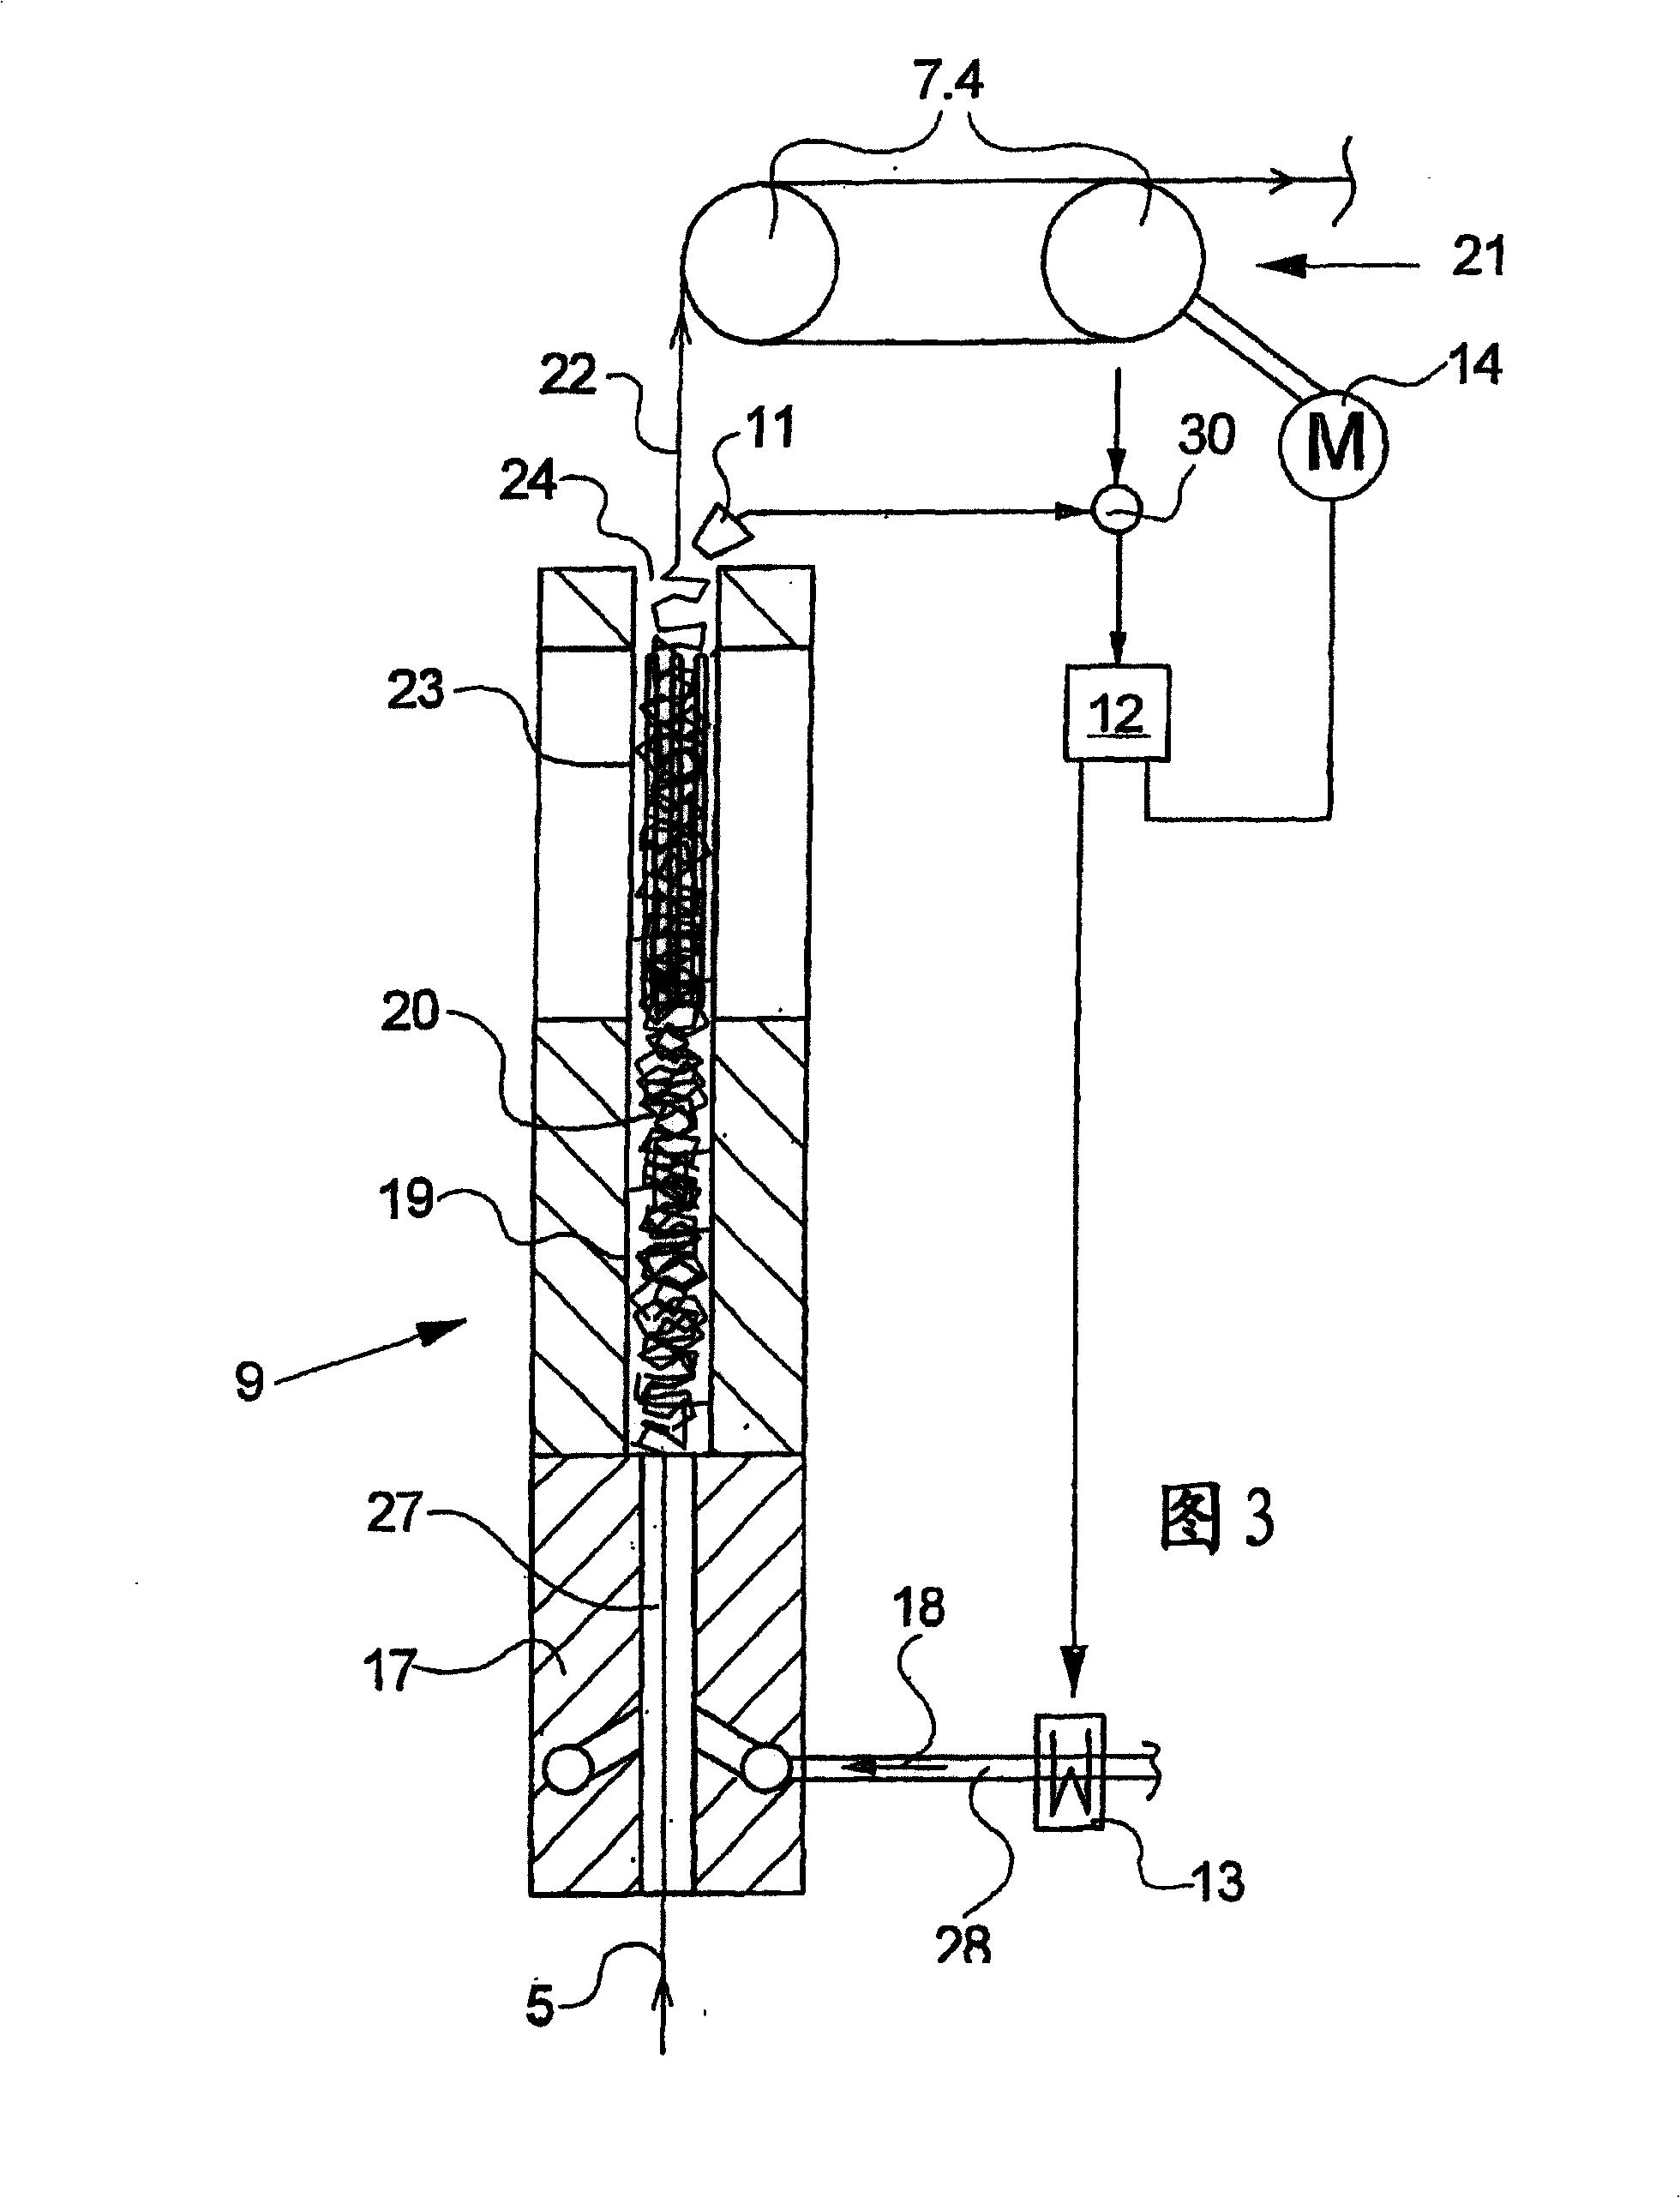 Method and device for producing a low-shrinking smooth yarn